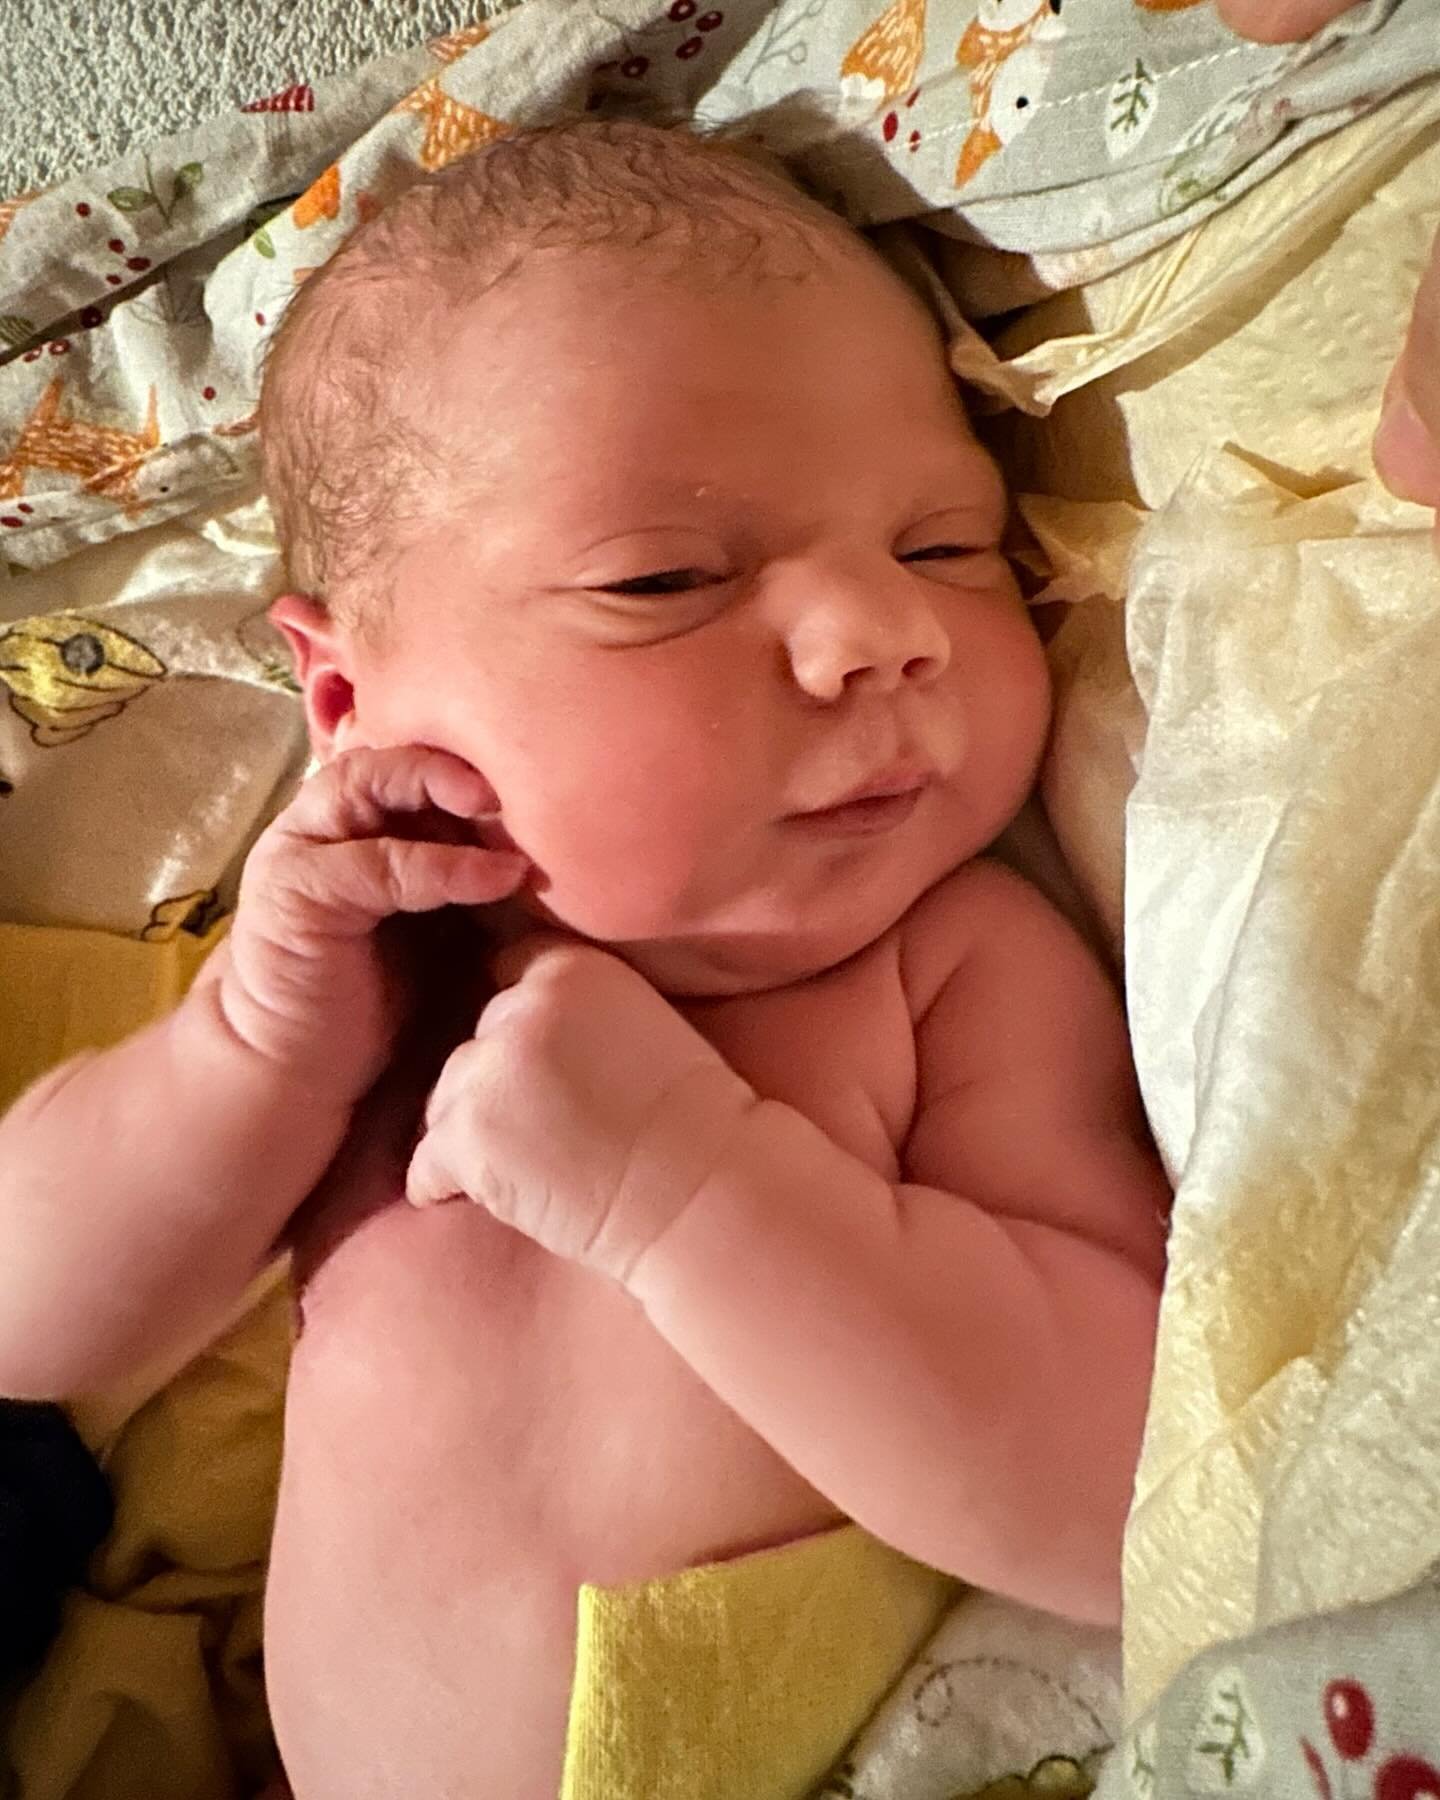 This little sweetie pie is Hearth &amp; Home&rsquo;s newest baby! She was born at home last night in the waterbirth tub after a very swift birth during which her mom had to work hard to stay on top of her ever-increasing contractions. Birth is such i